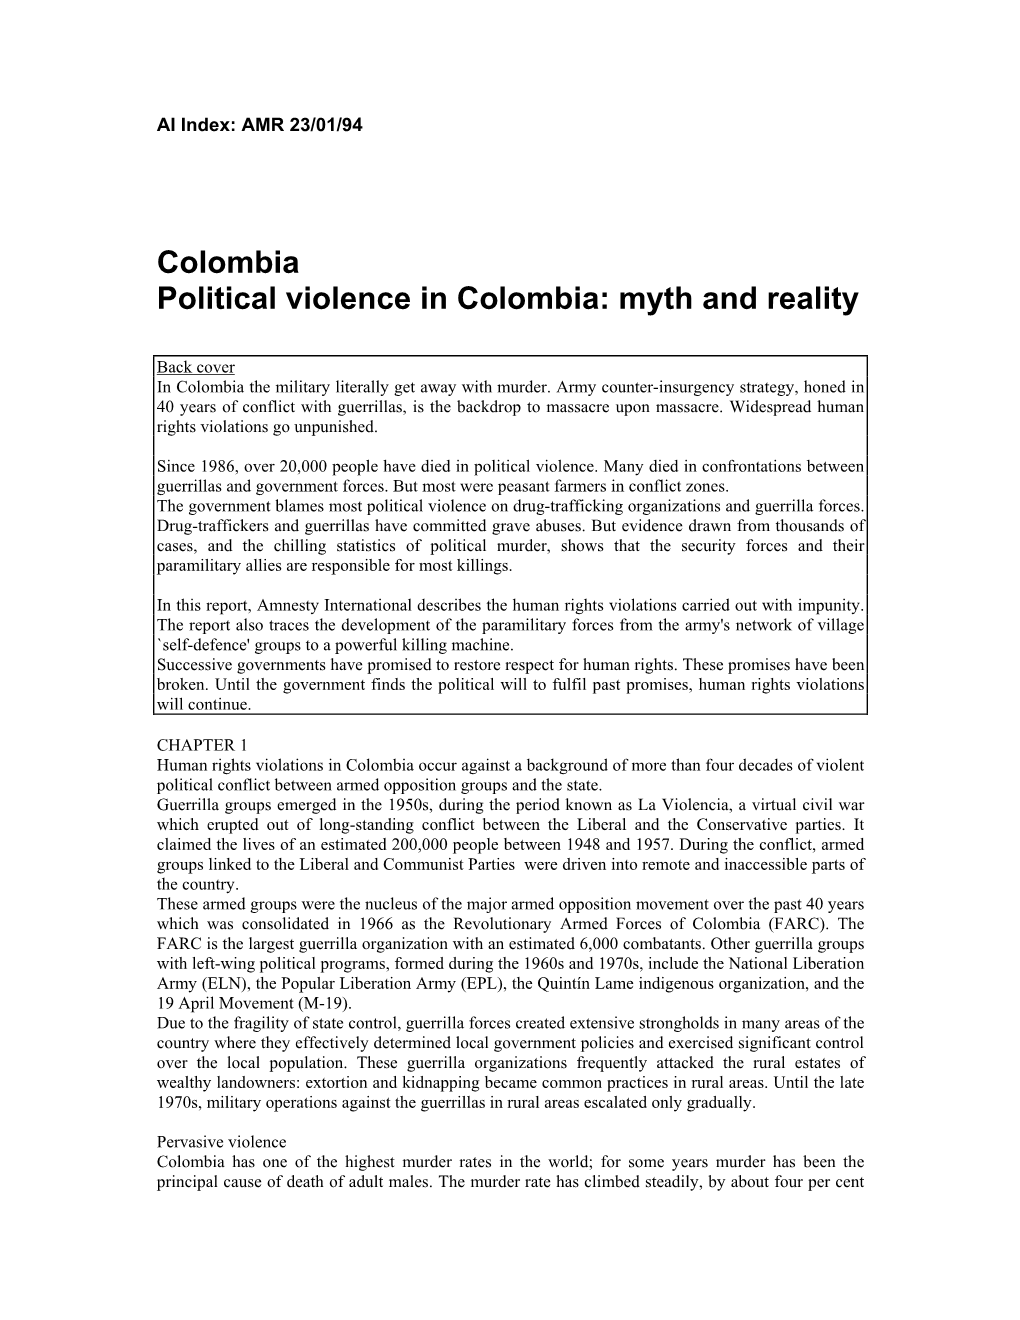 Colombia Political Violence in Colombia: Myth and Reality